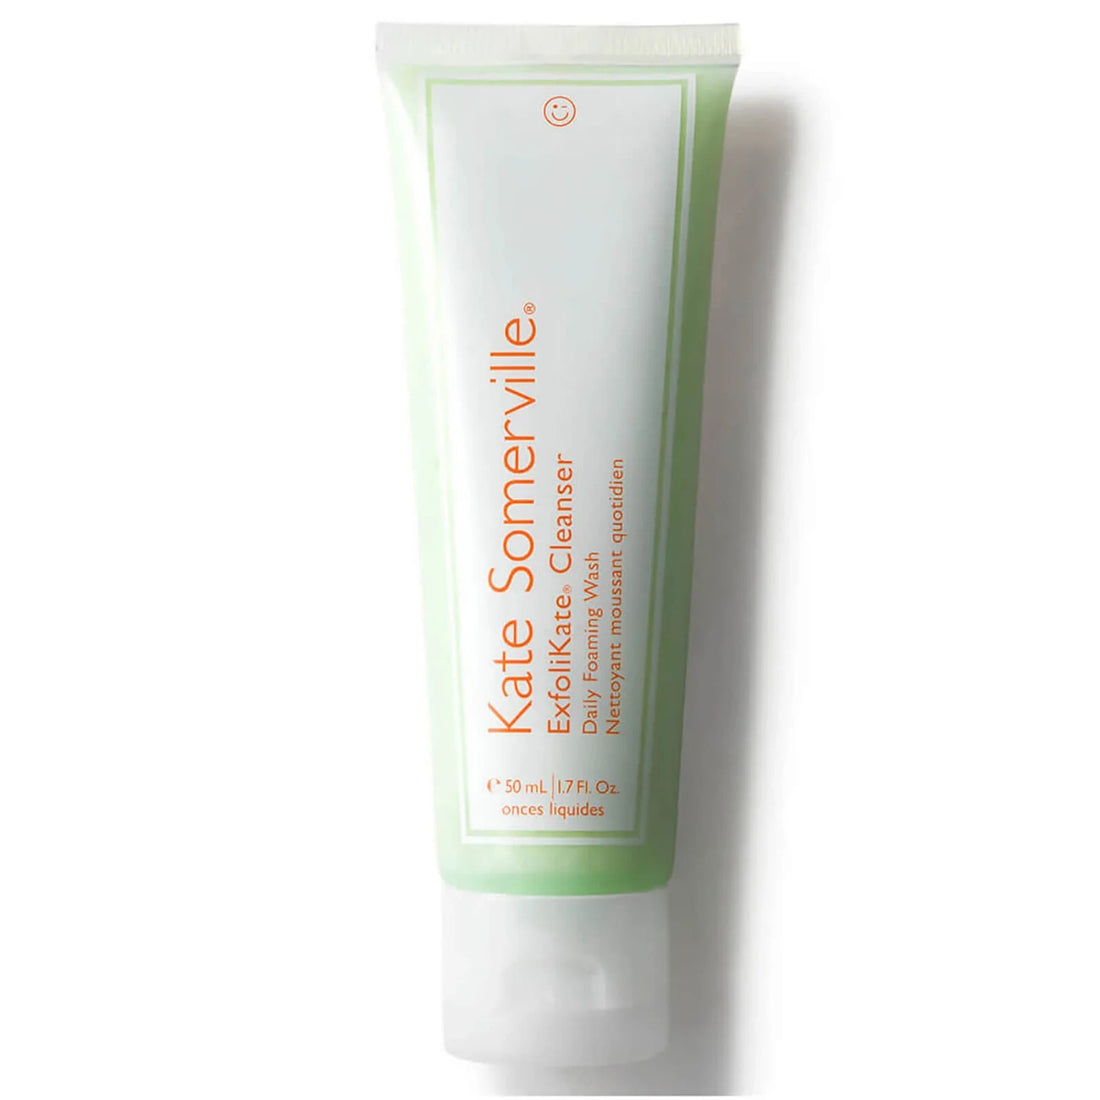 Kate Somerville Travel Size ExfoliKate Cleanser Daily Foaming Wash